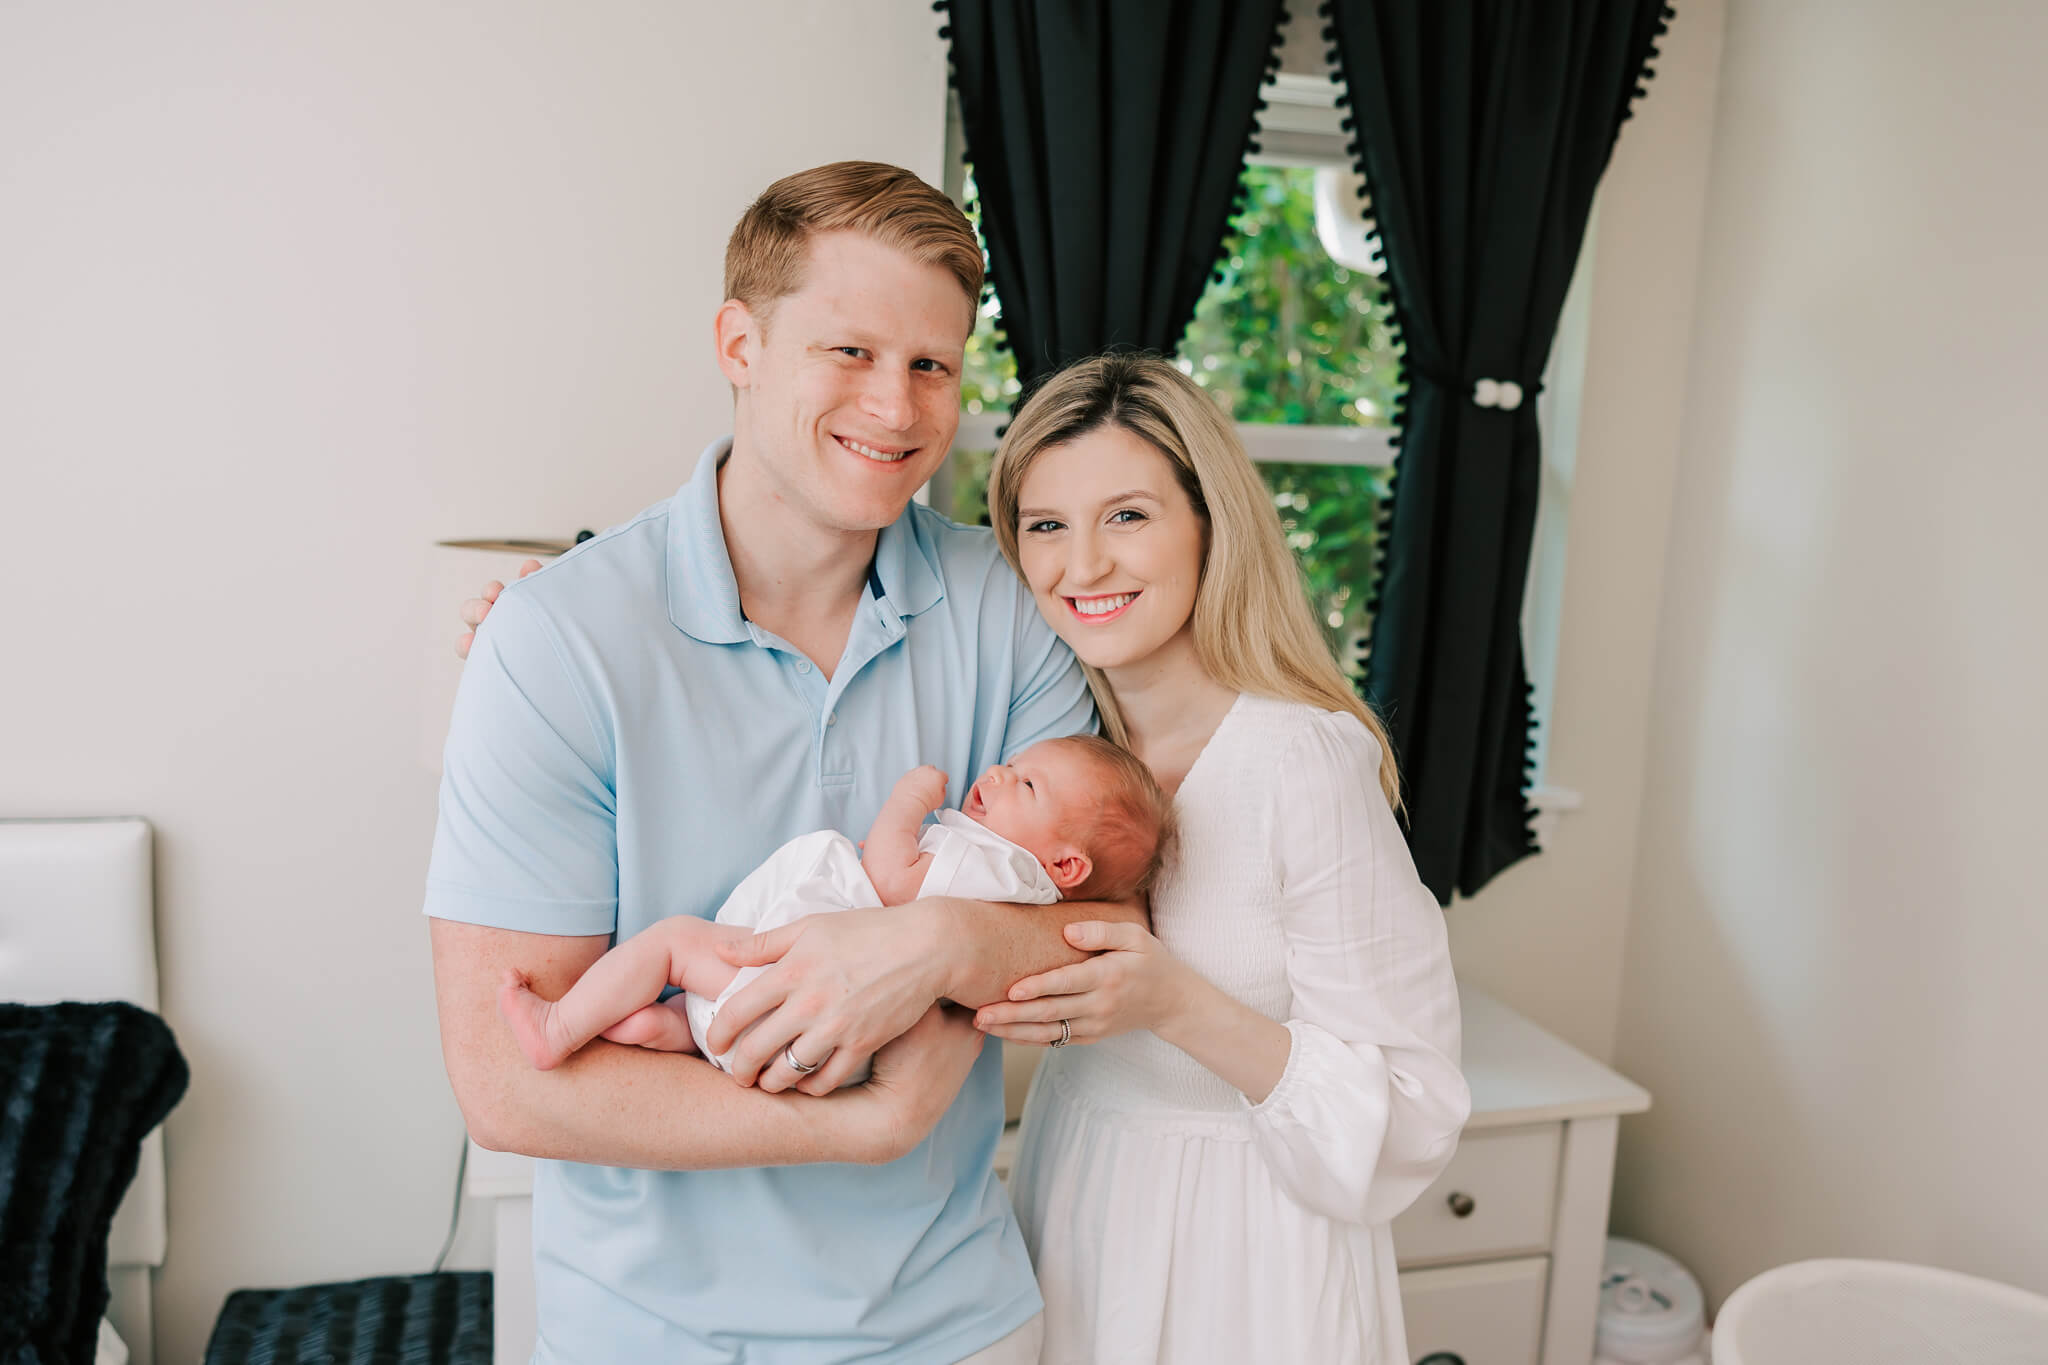 New family of three sharing a moment together during their inhome newborn session in Atlanta. Mom used Breastfeed Atlanta for lactation help.